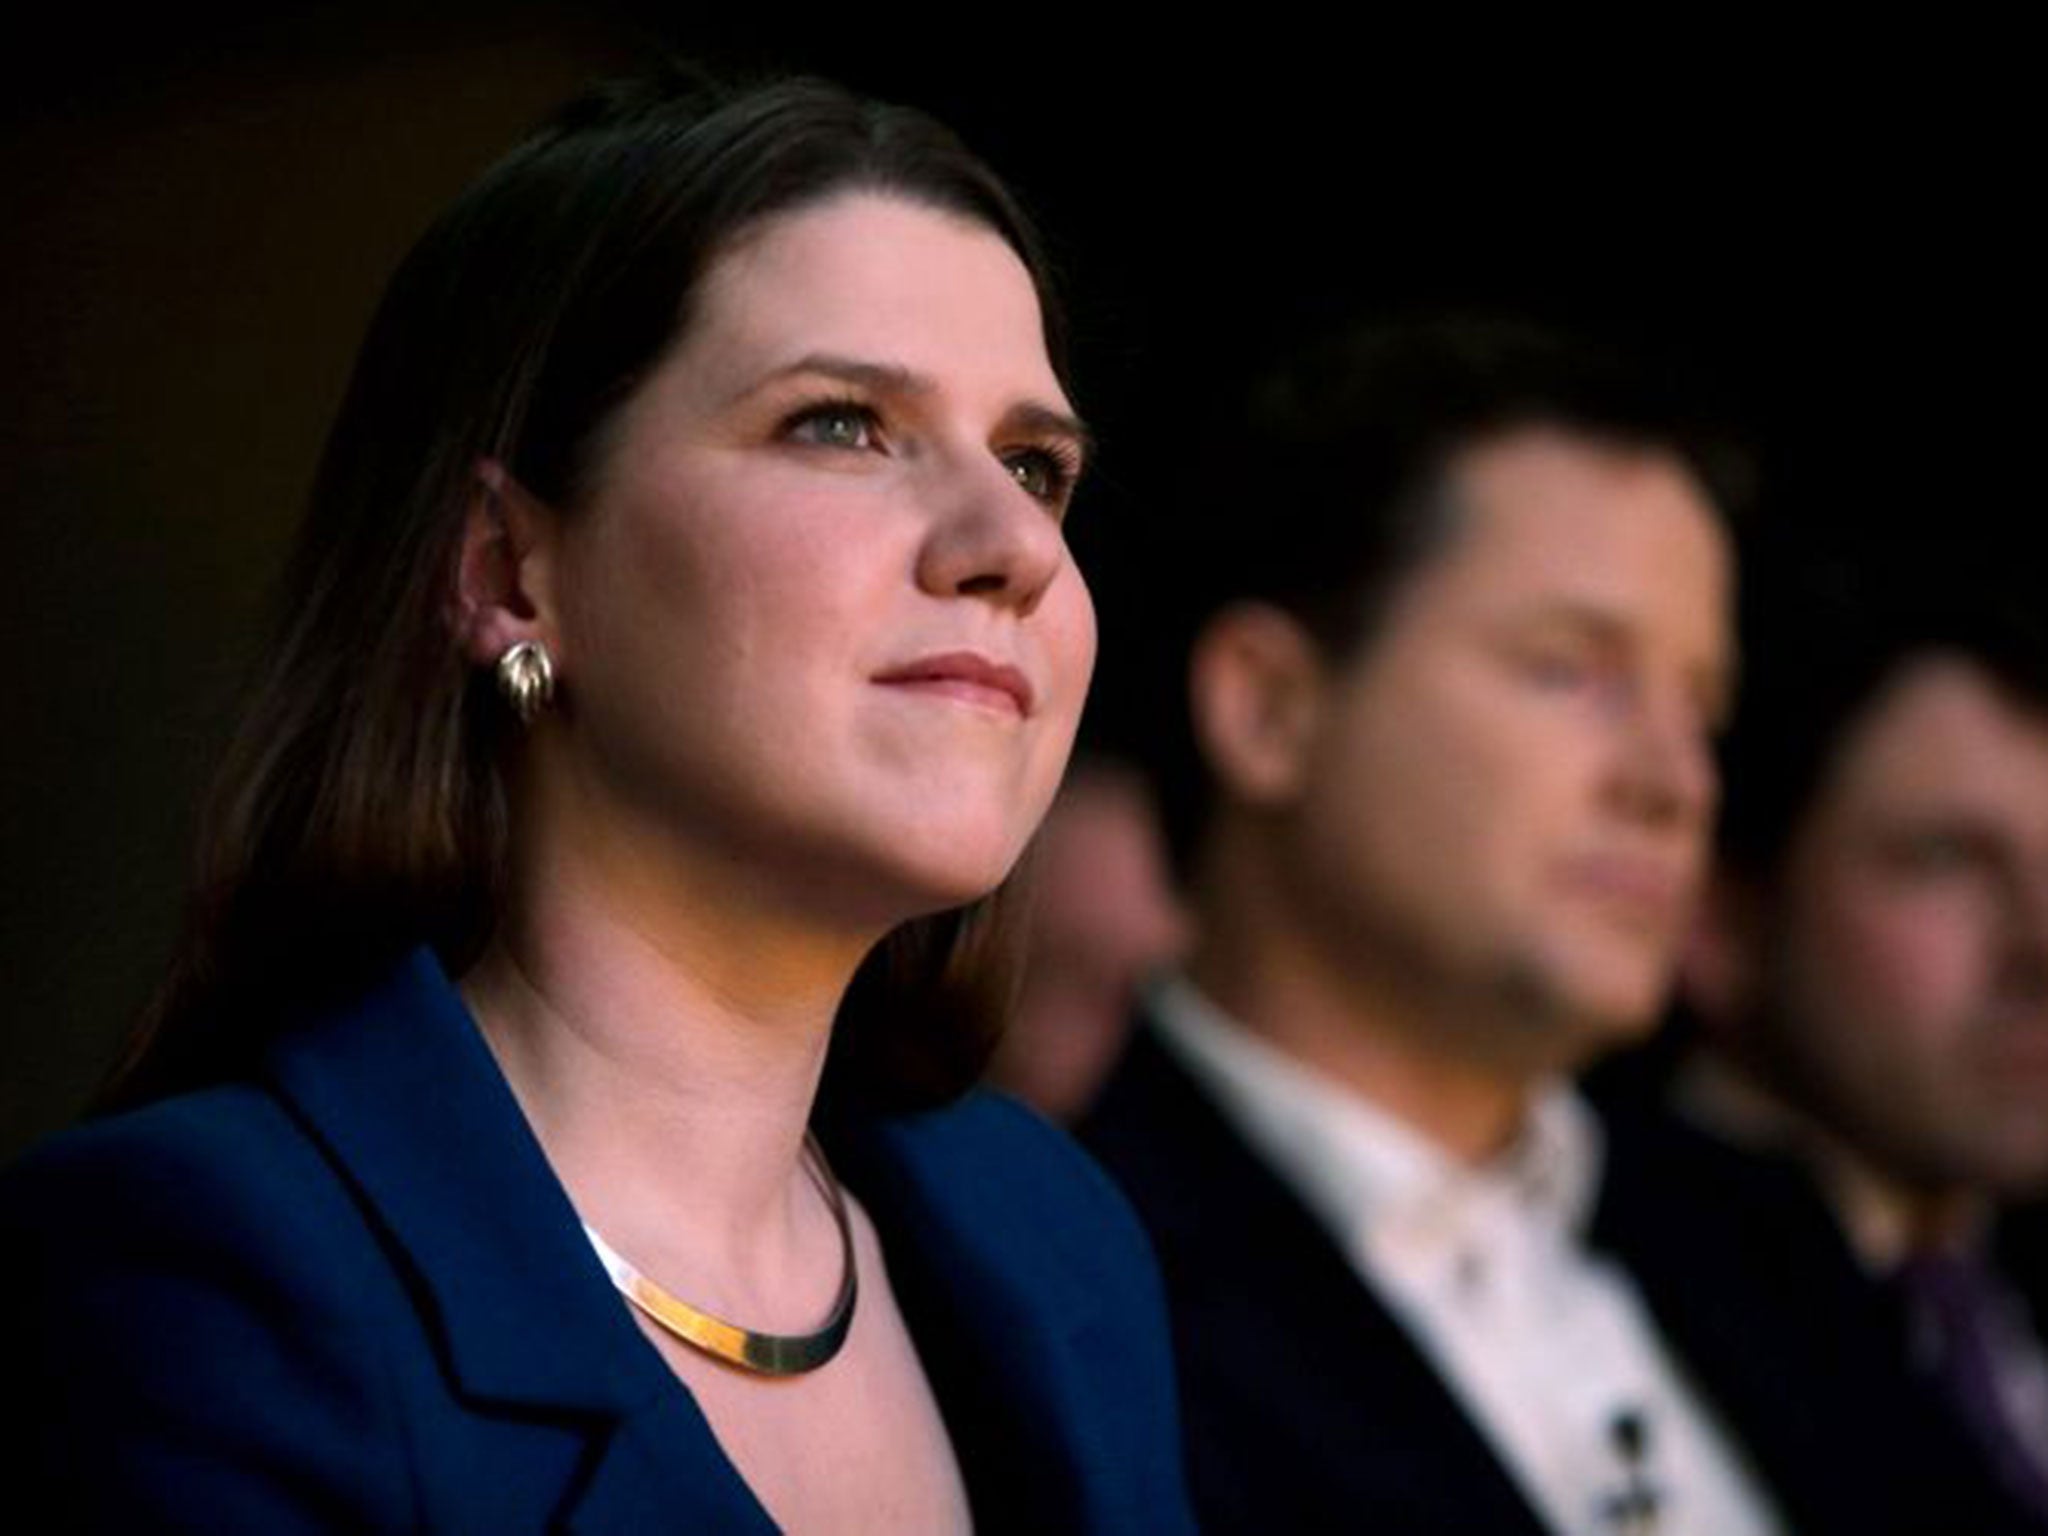 Rumours that Jo Swinson could become Scottish Secretary were dashed